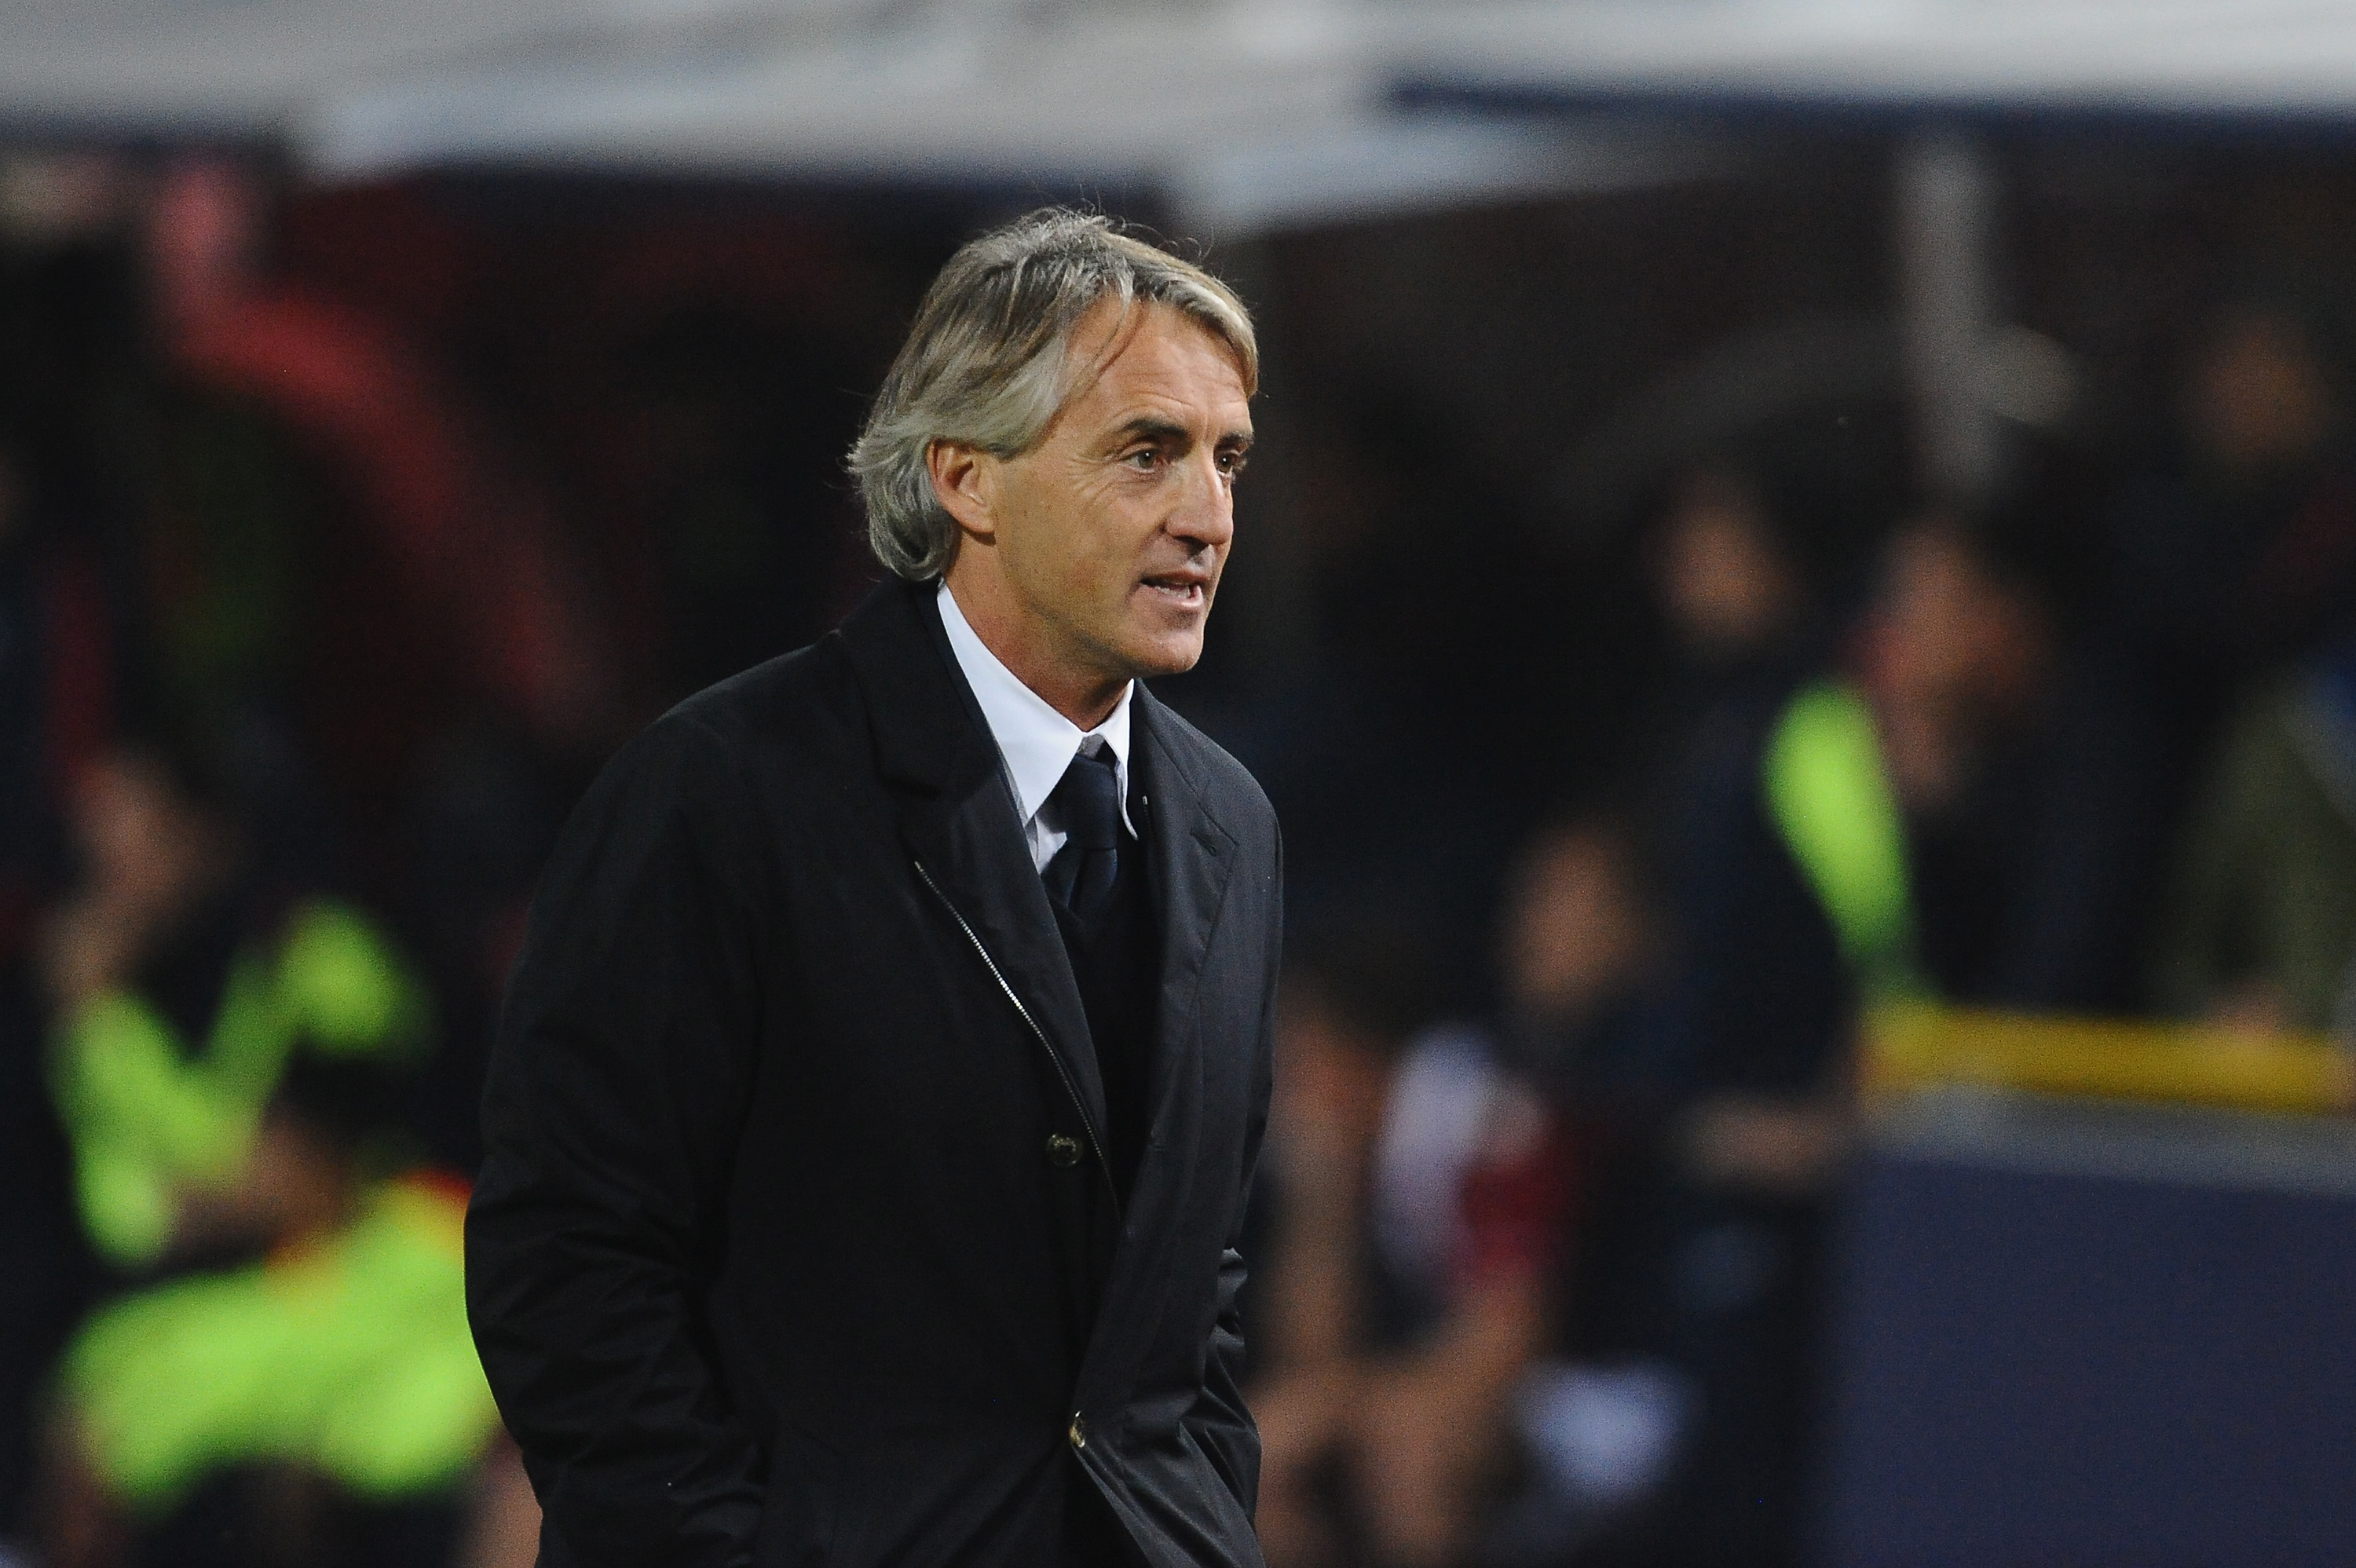 Mancini to MP: “Super game. Icardi out? Technical decision”